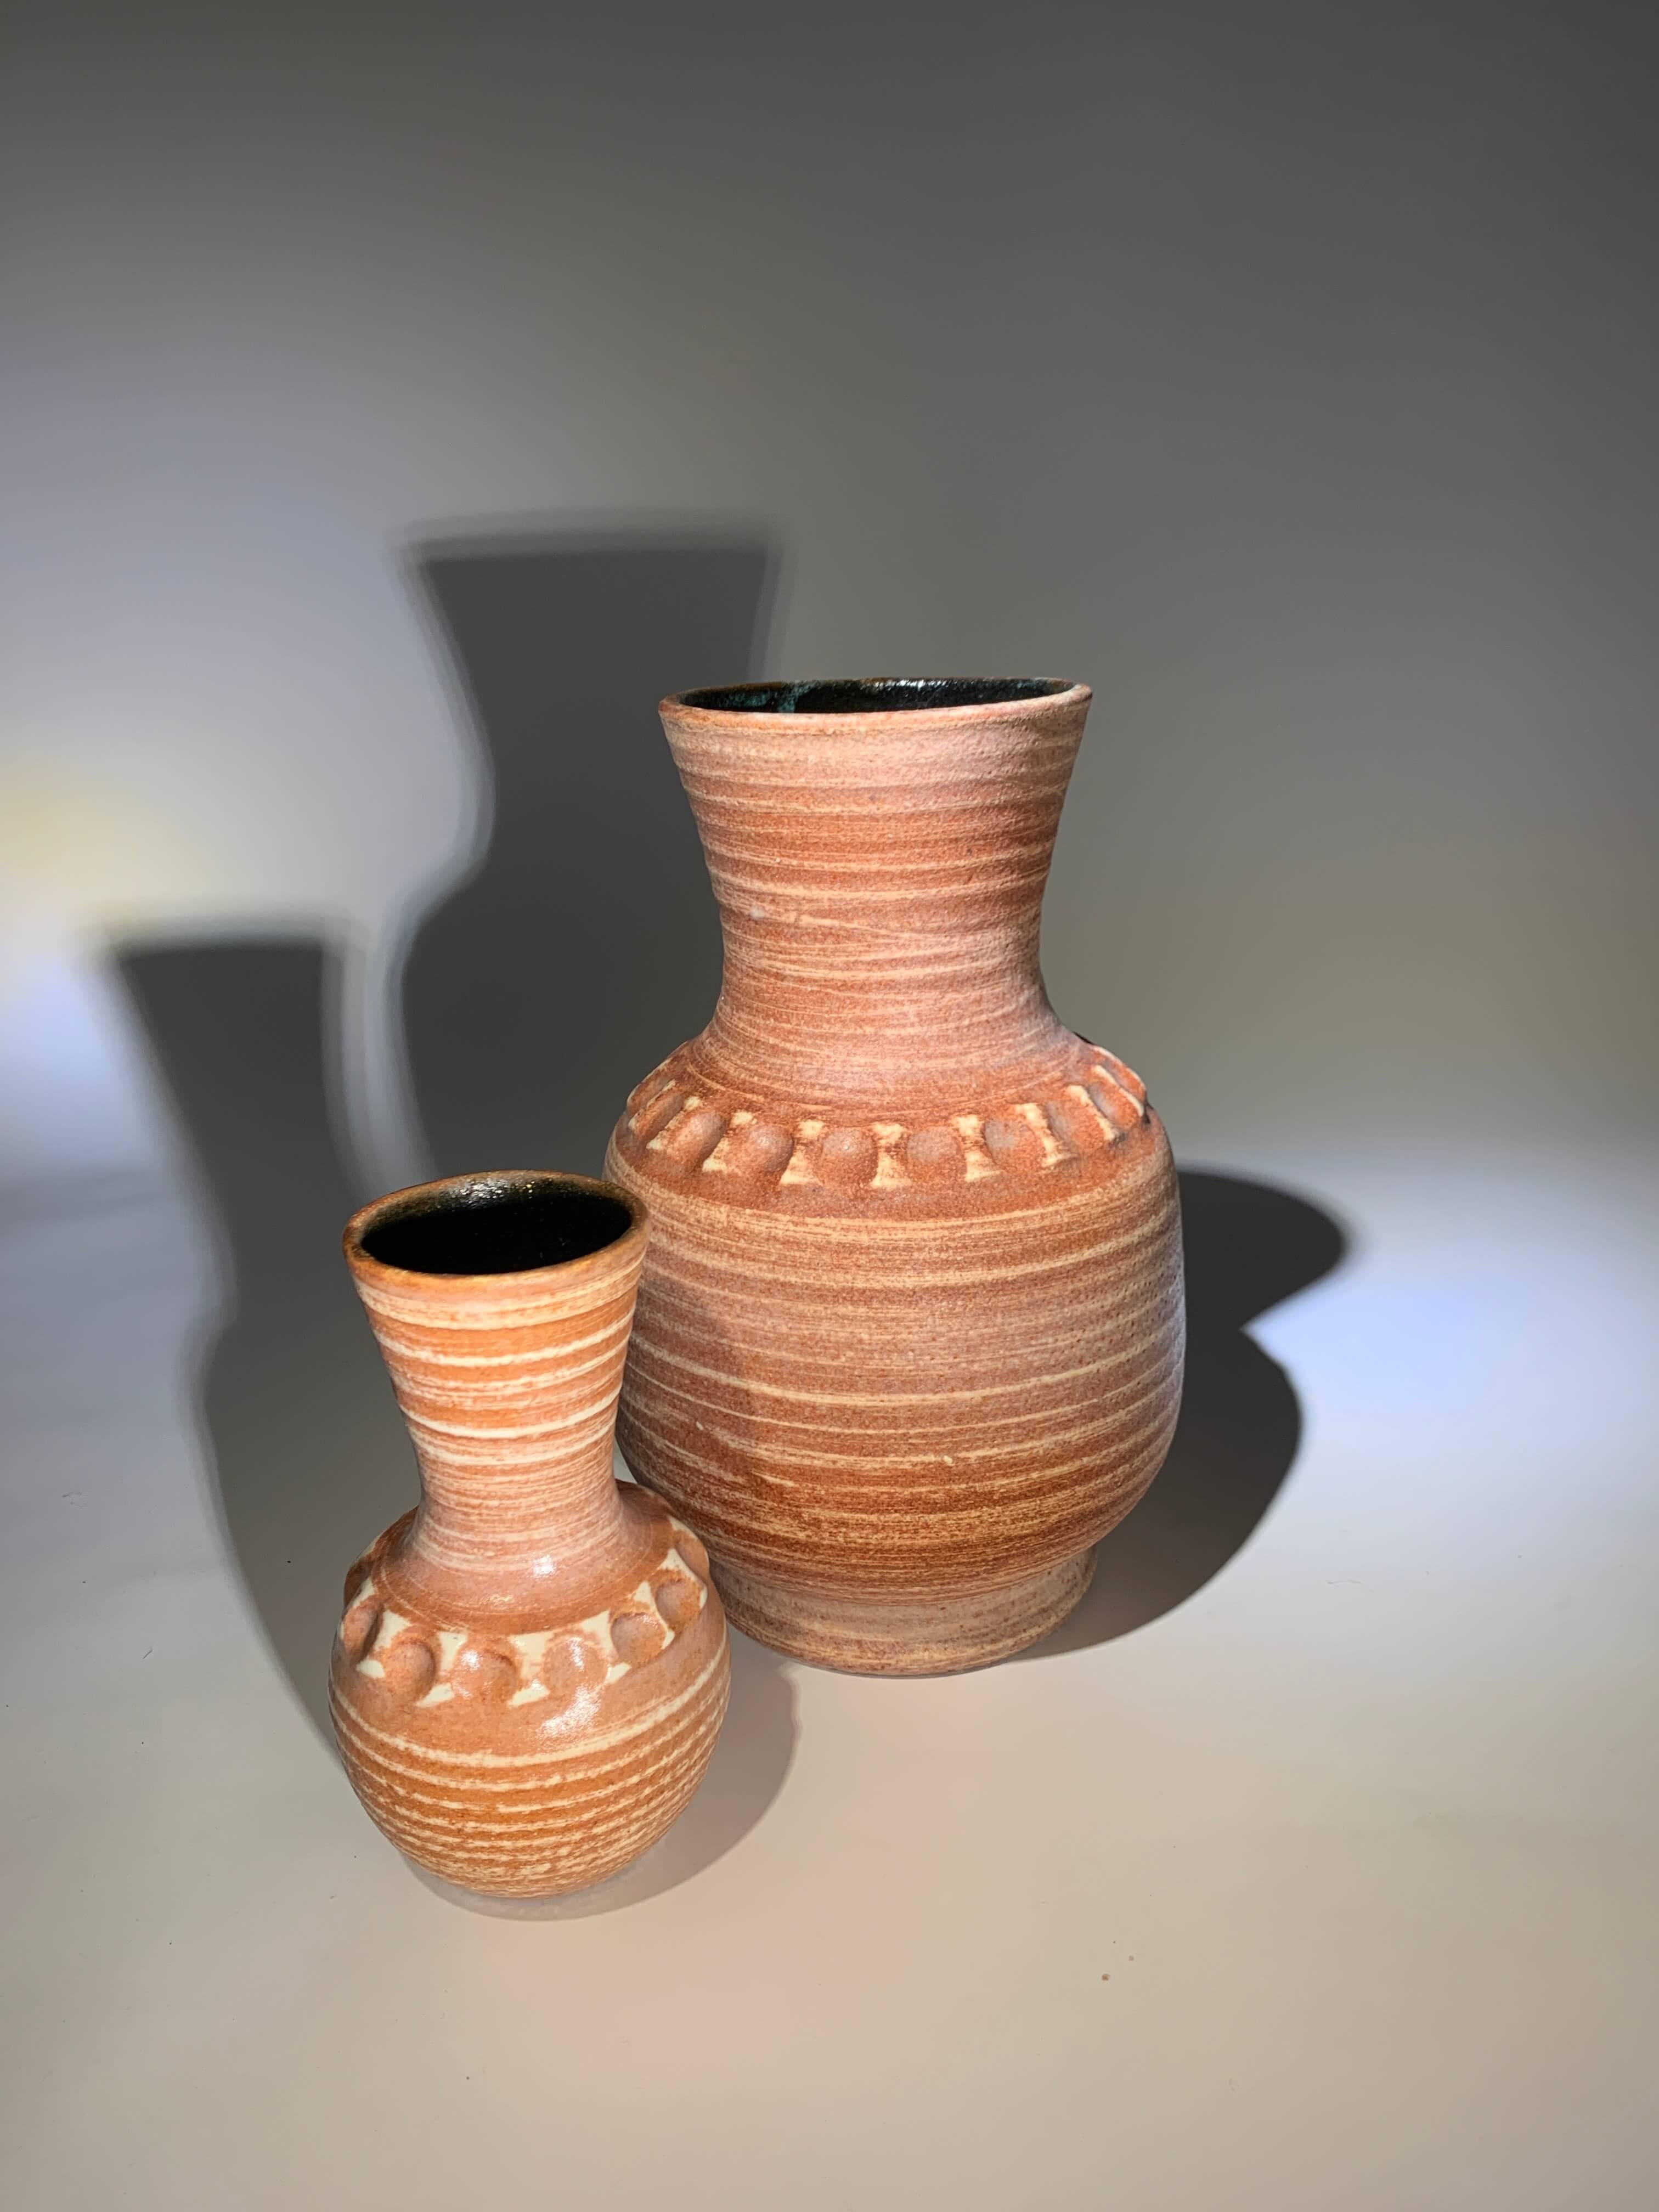 Accolay vases from the famous “Gauloise” series, 
rare in these terracotta tones.
Excellent condition, signed.
Dimensions: H 31cm x W 21cm / H 19cm x L 11cm
France, ca. 1960